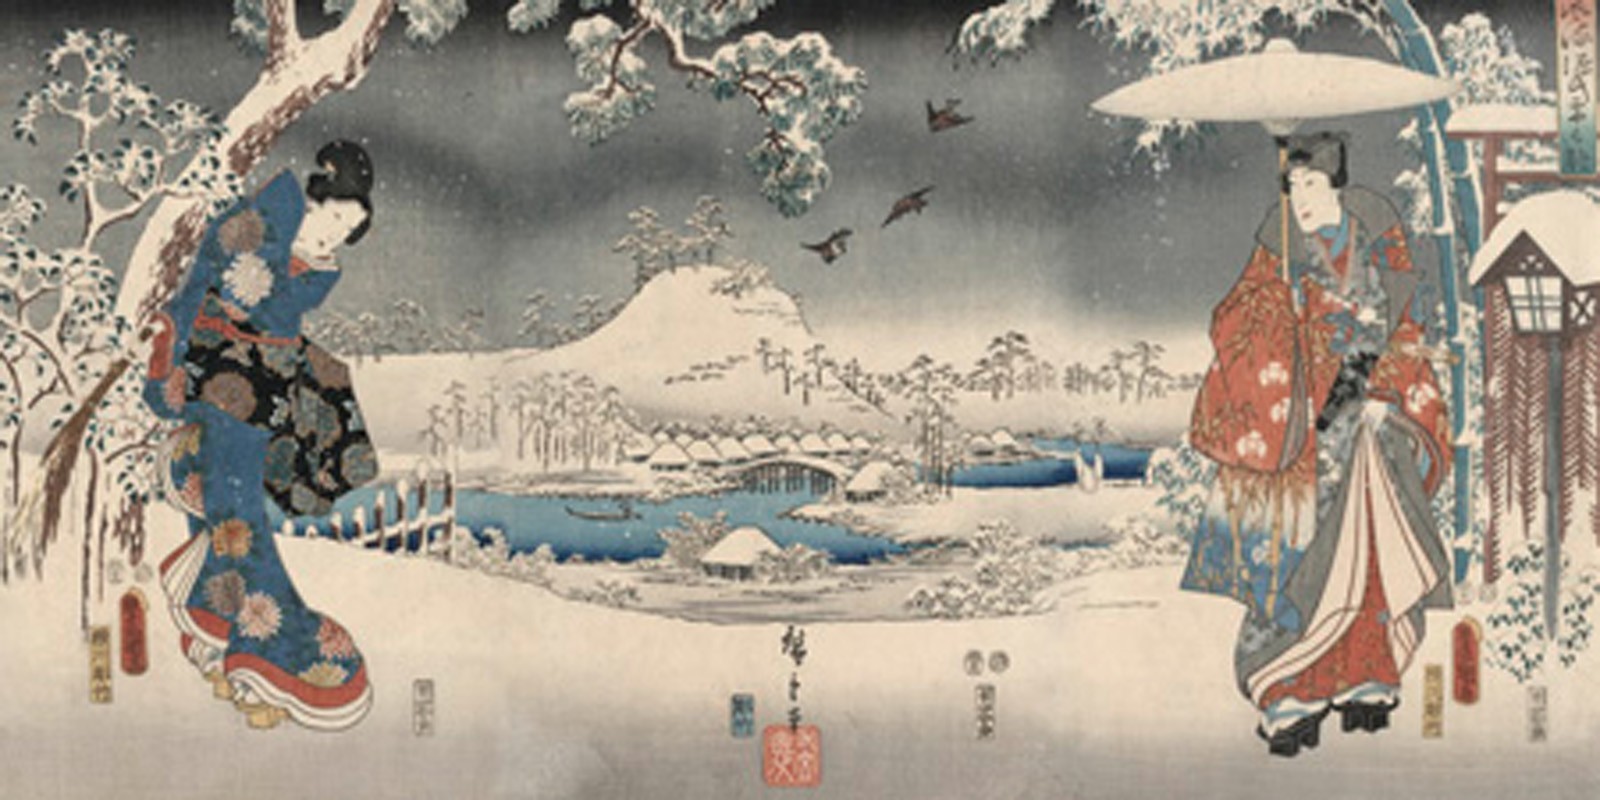 Ando Hiroshige - Snowy landscape with a woman and a man, 1853